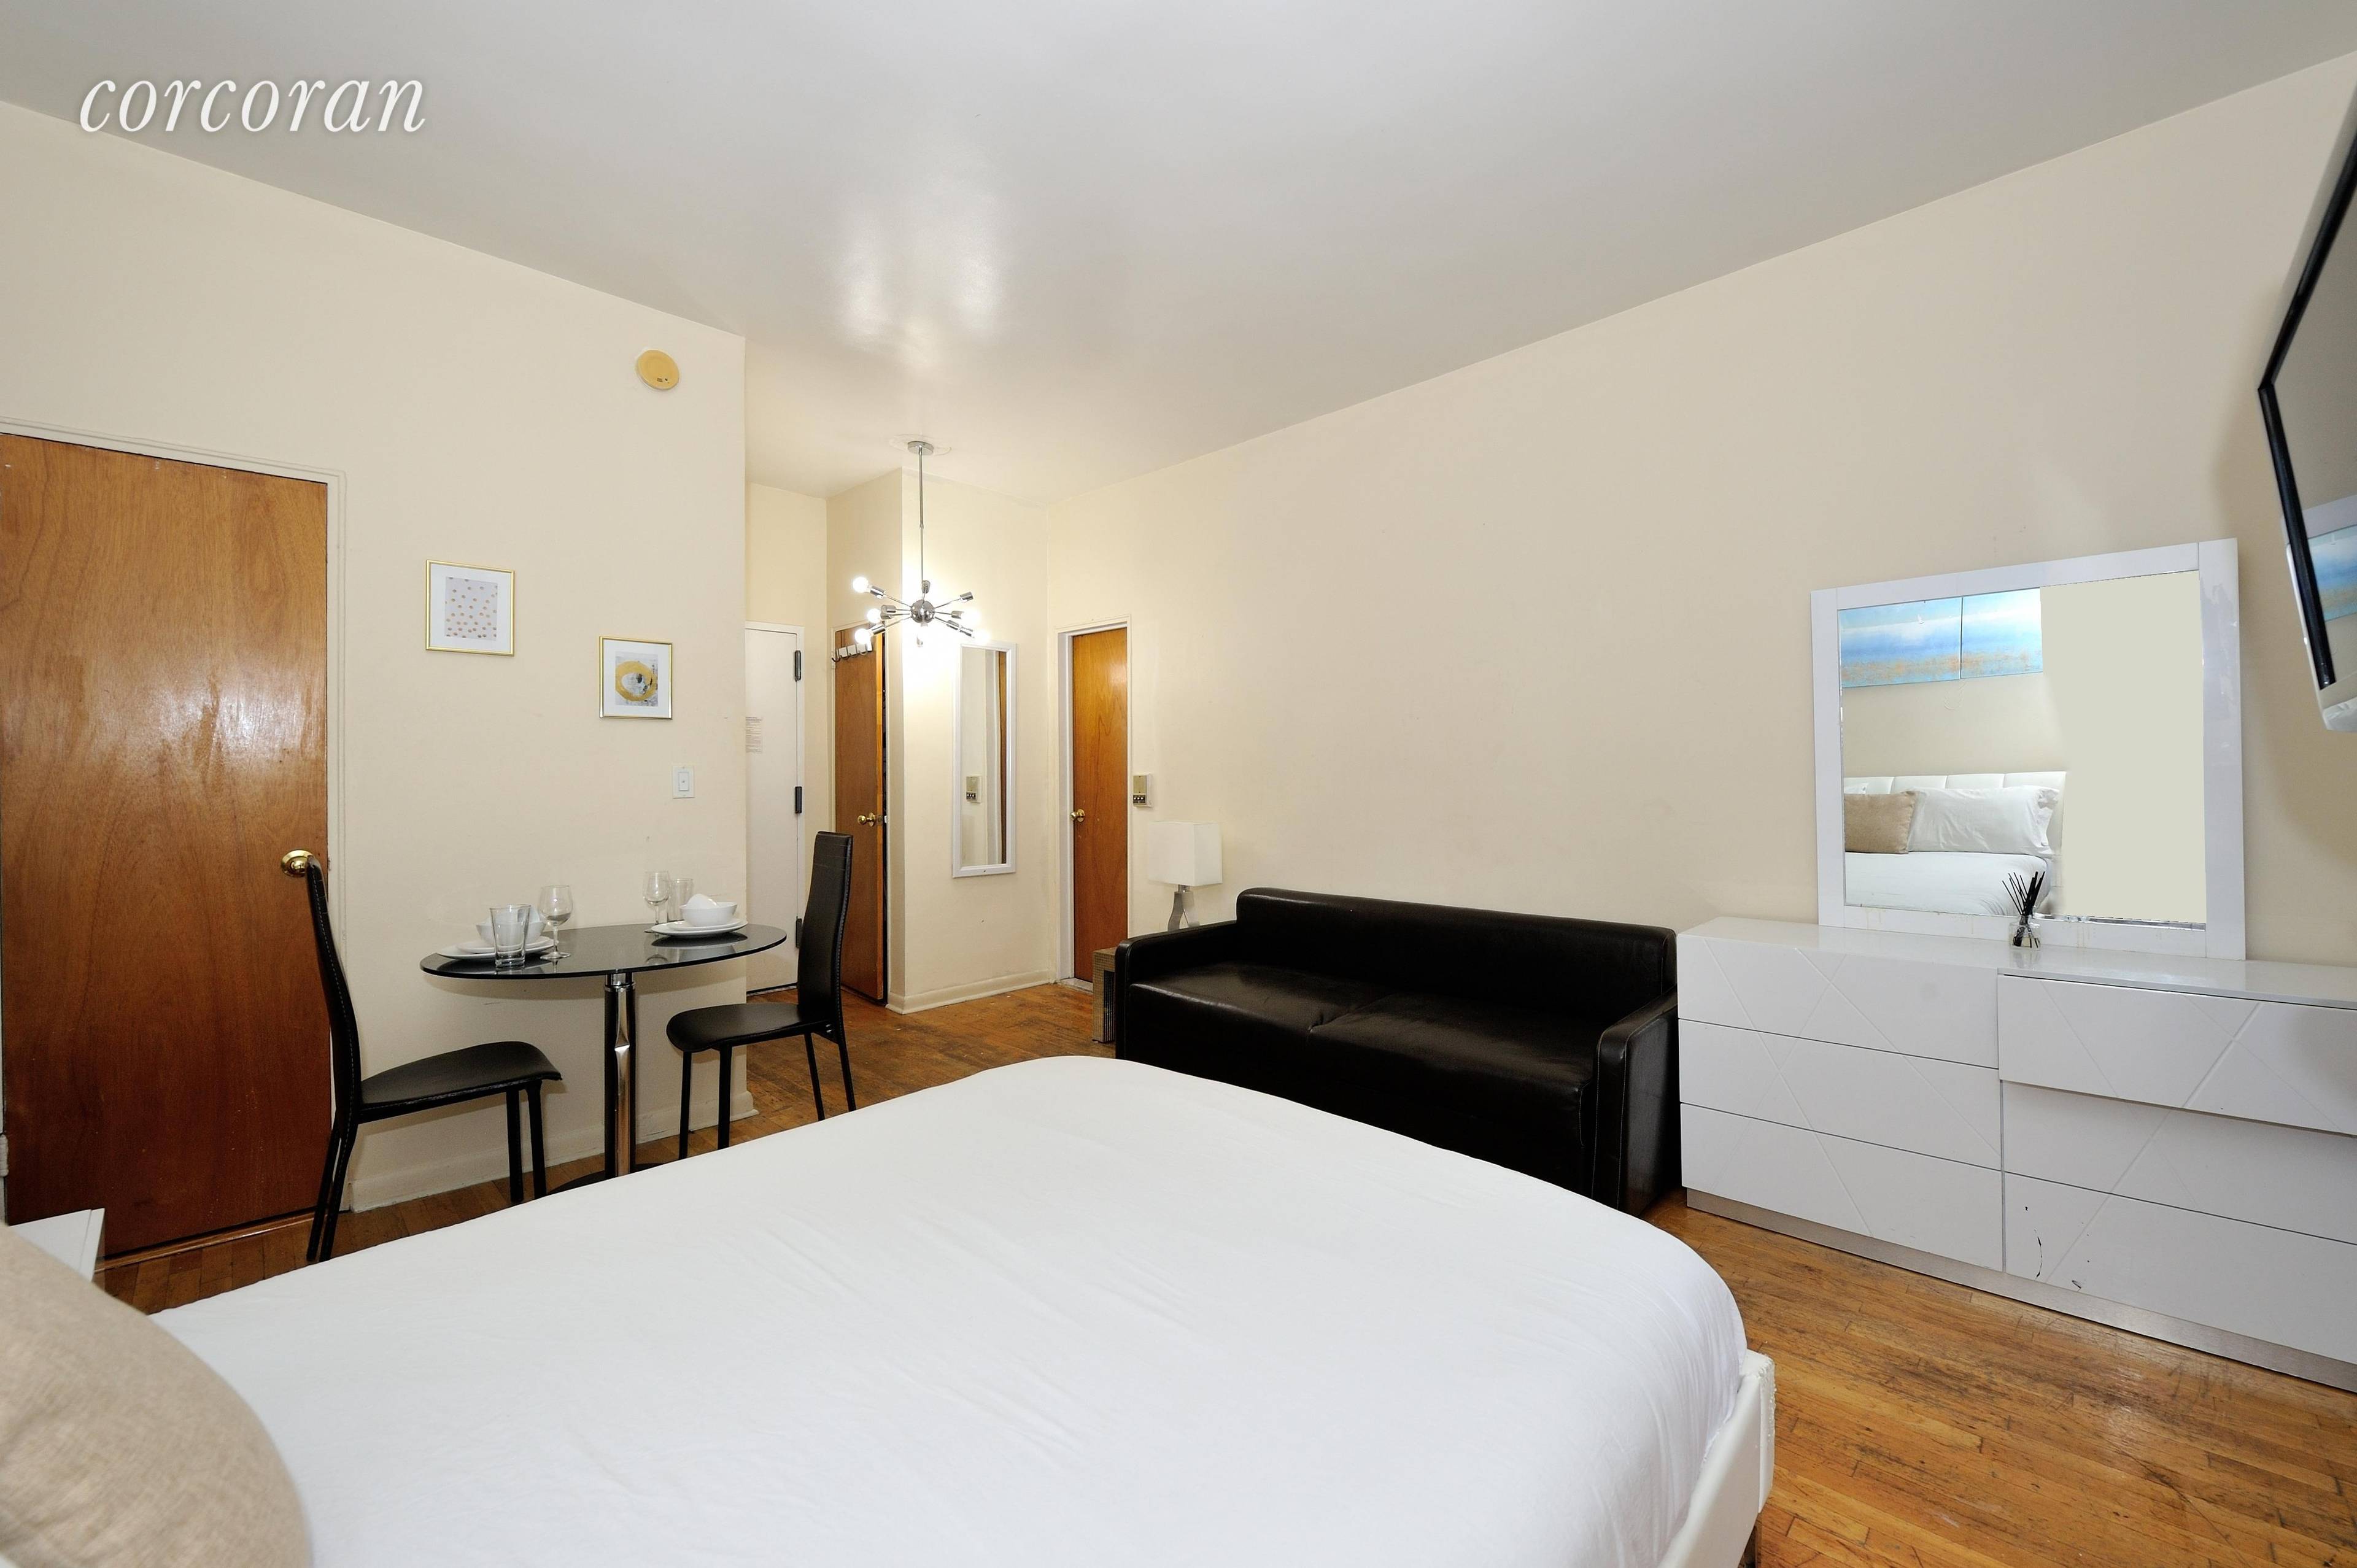 Stay in Manhattan's historic Upper East Side in this modern and comfortable studio.